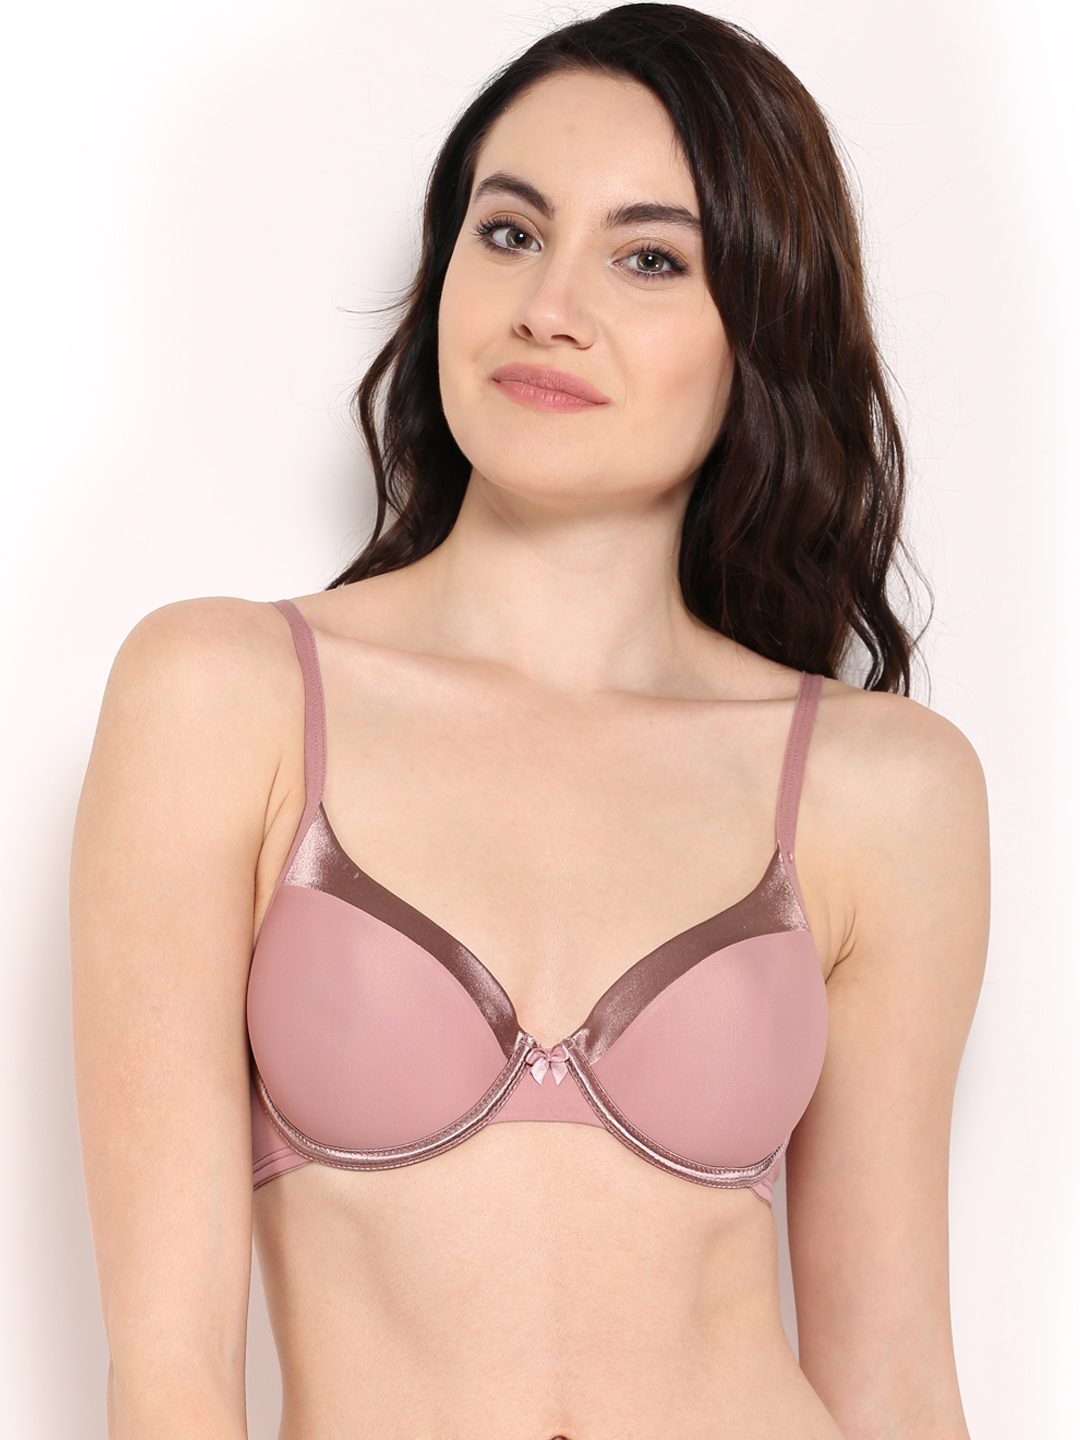 Amante Pink T-Shirt Bra BGSE31 Price in India